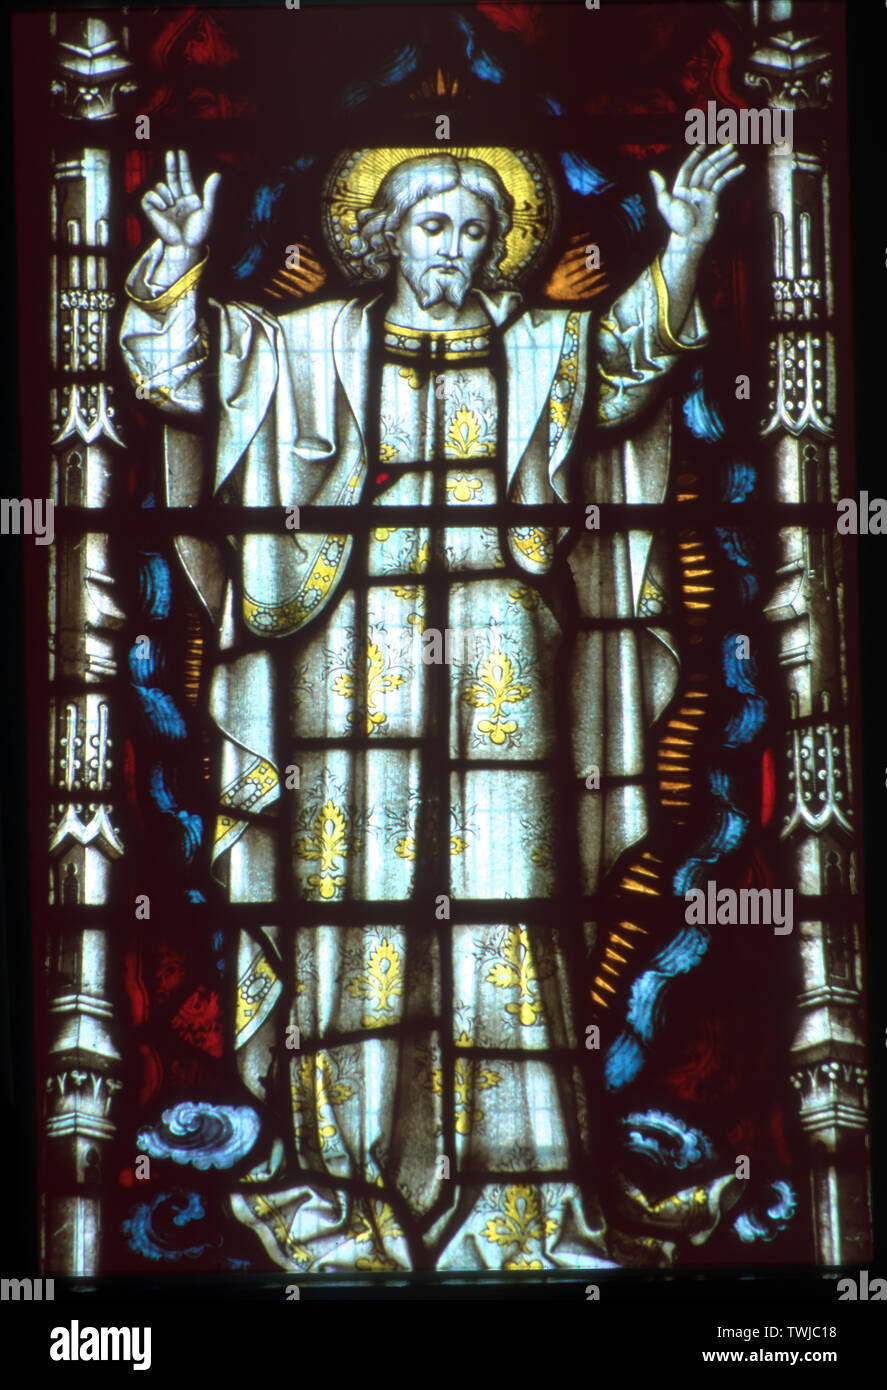 Stained glass window, Christ Ascended, St Edmund's, Assington, Suffolk, UK. Stock Photo